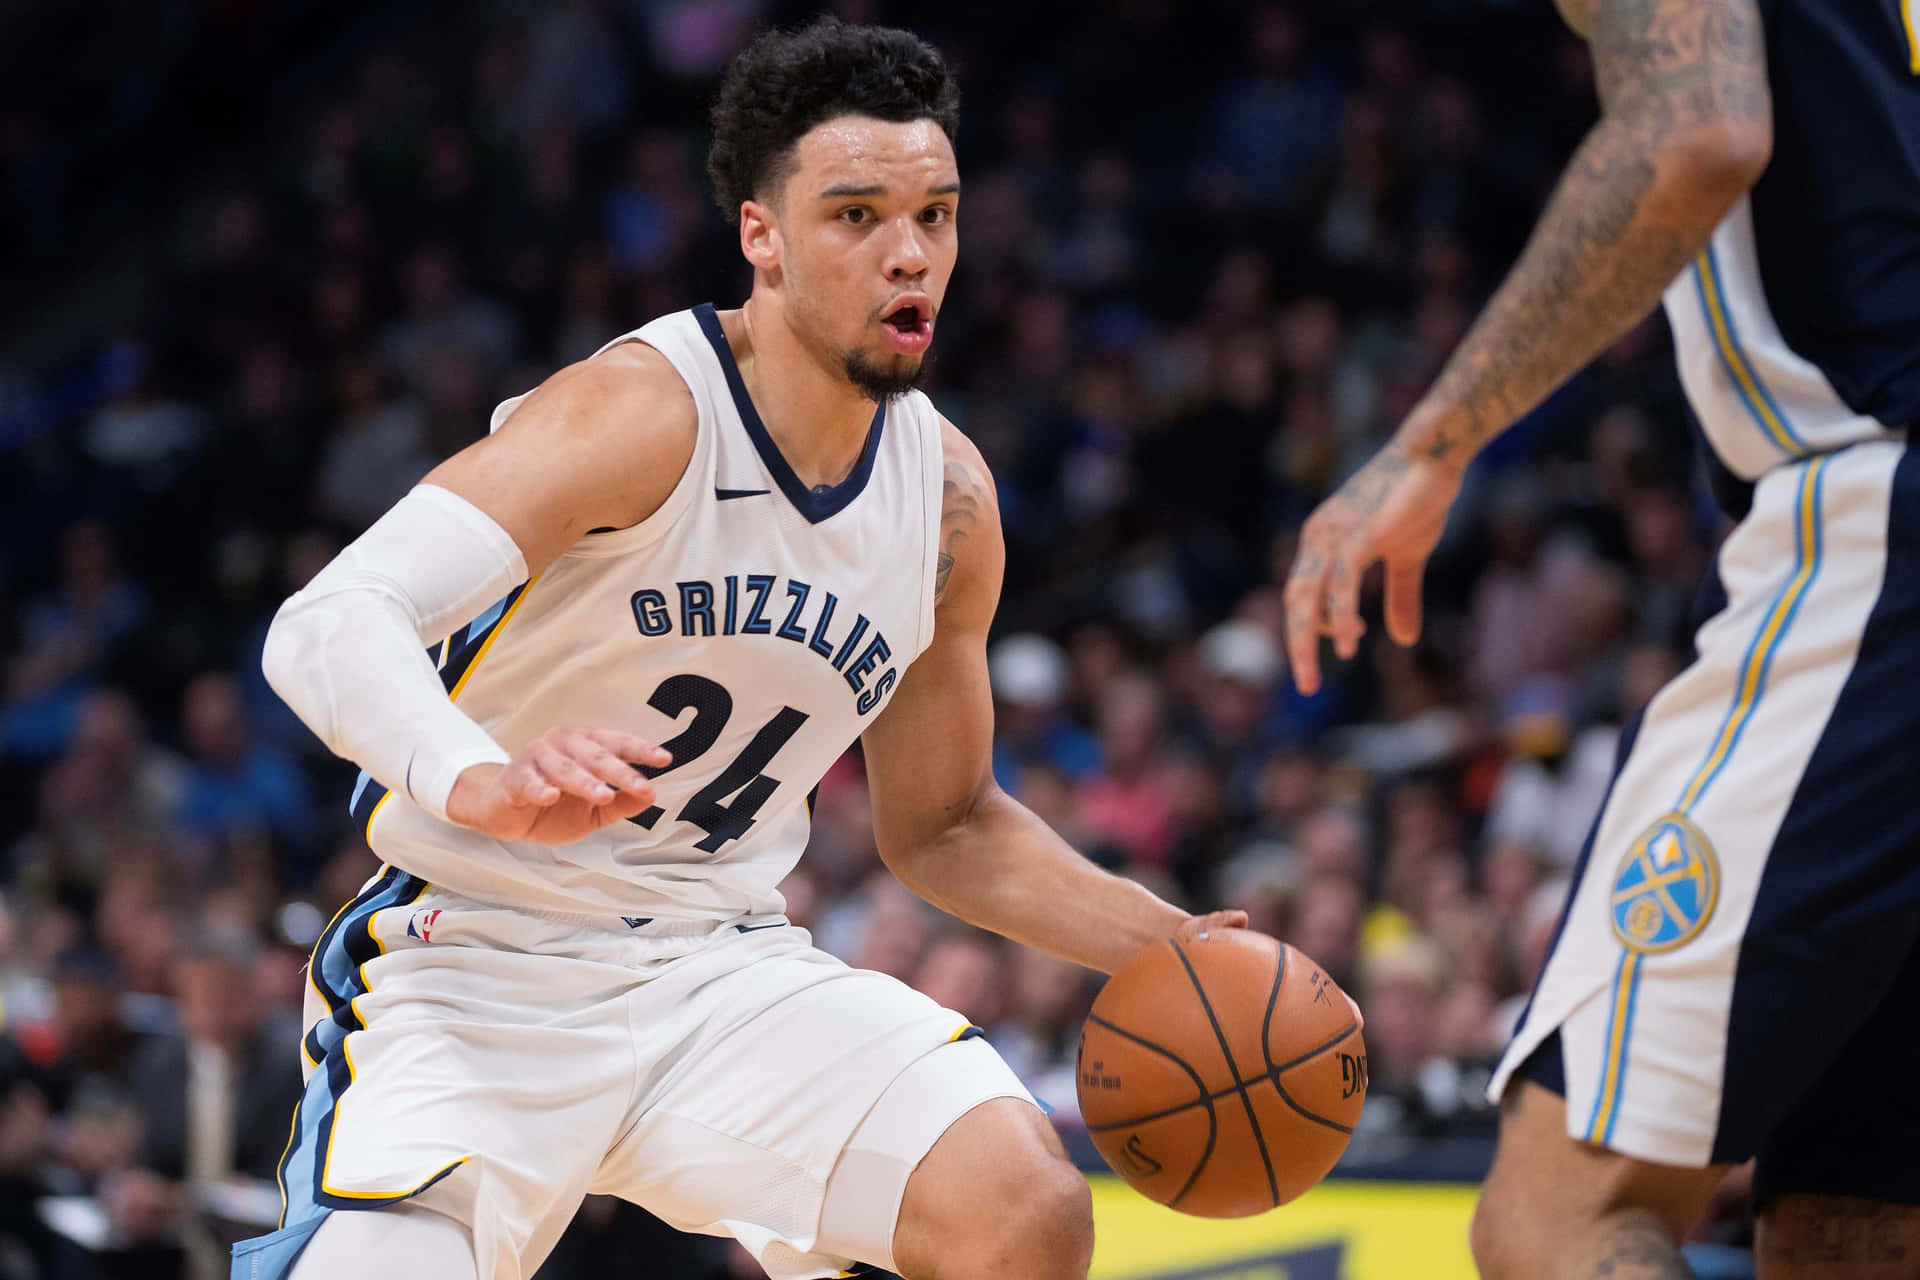 Dillon Brooks in action during a basketball game Wallpaper